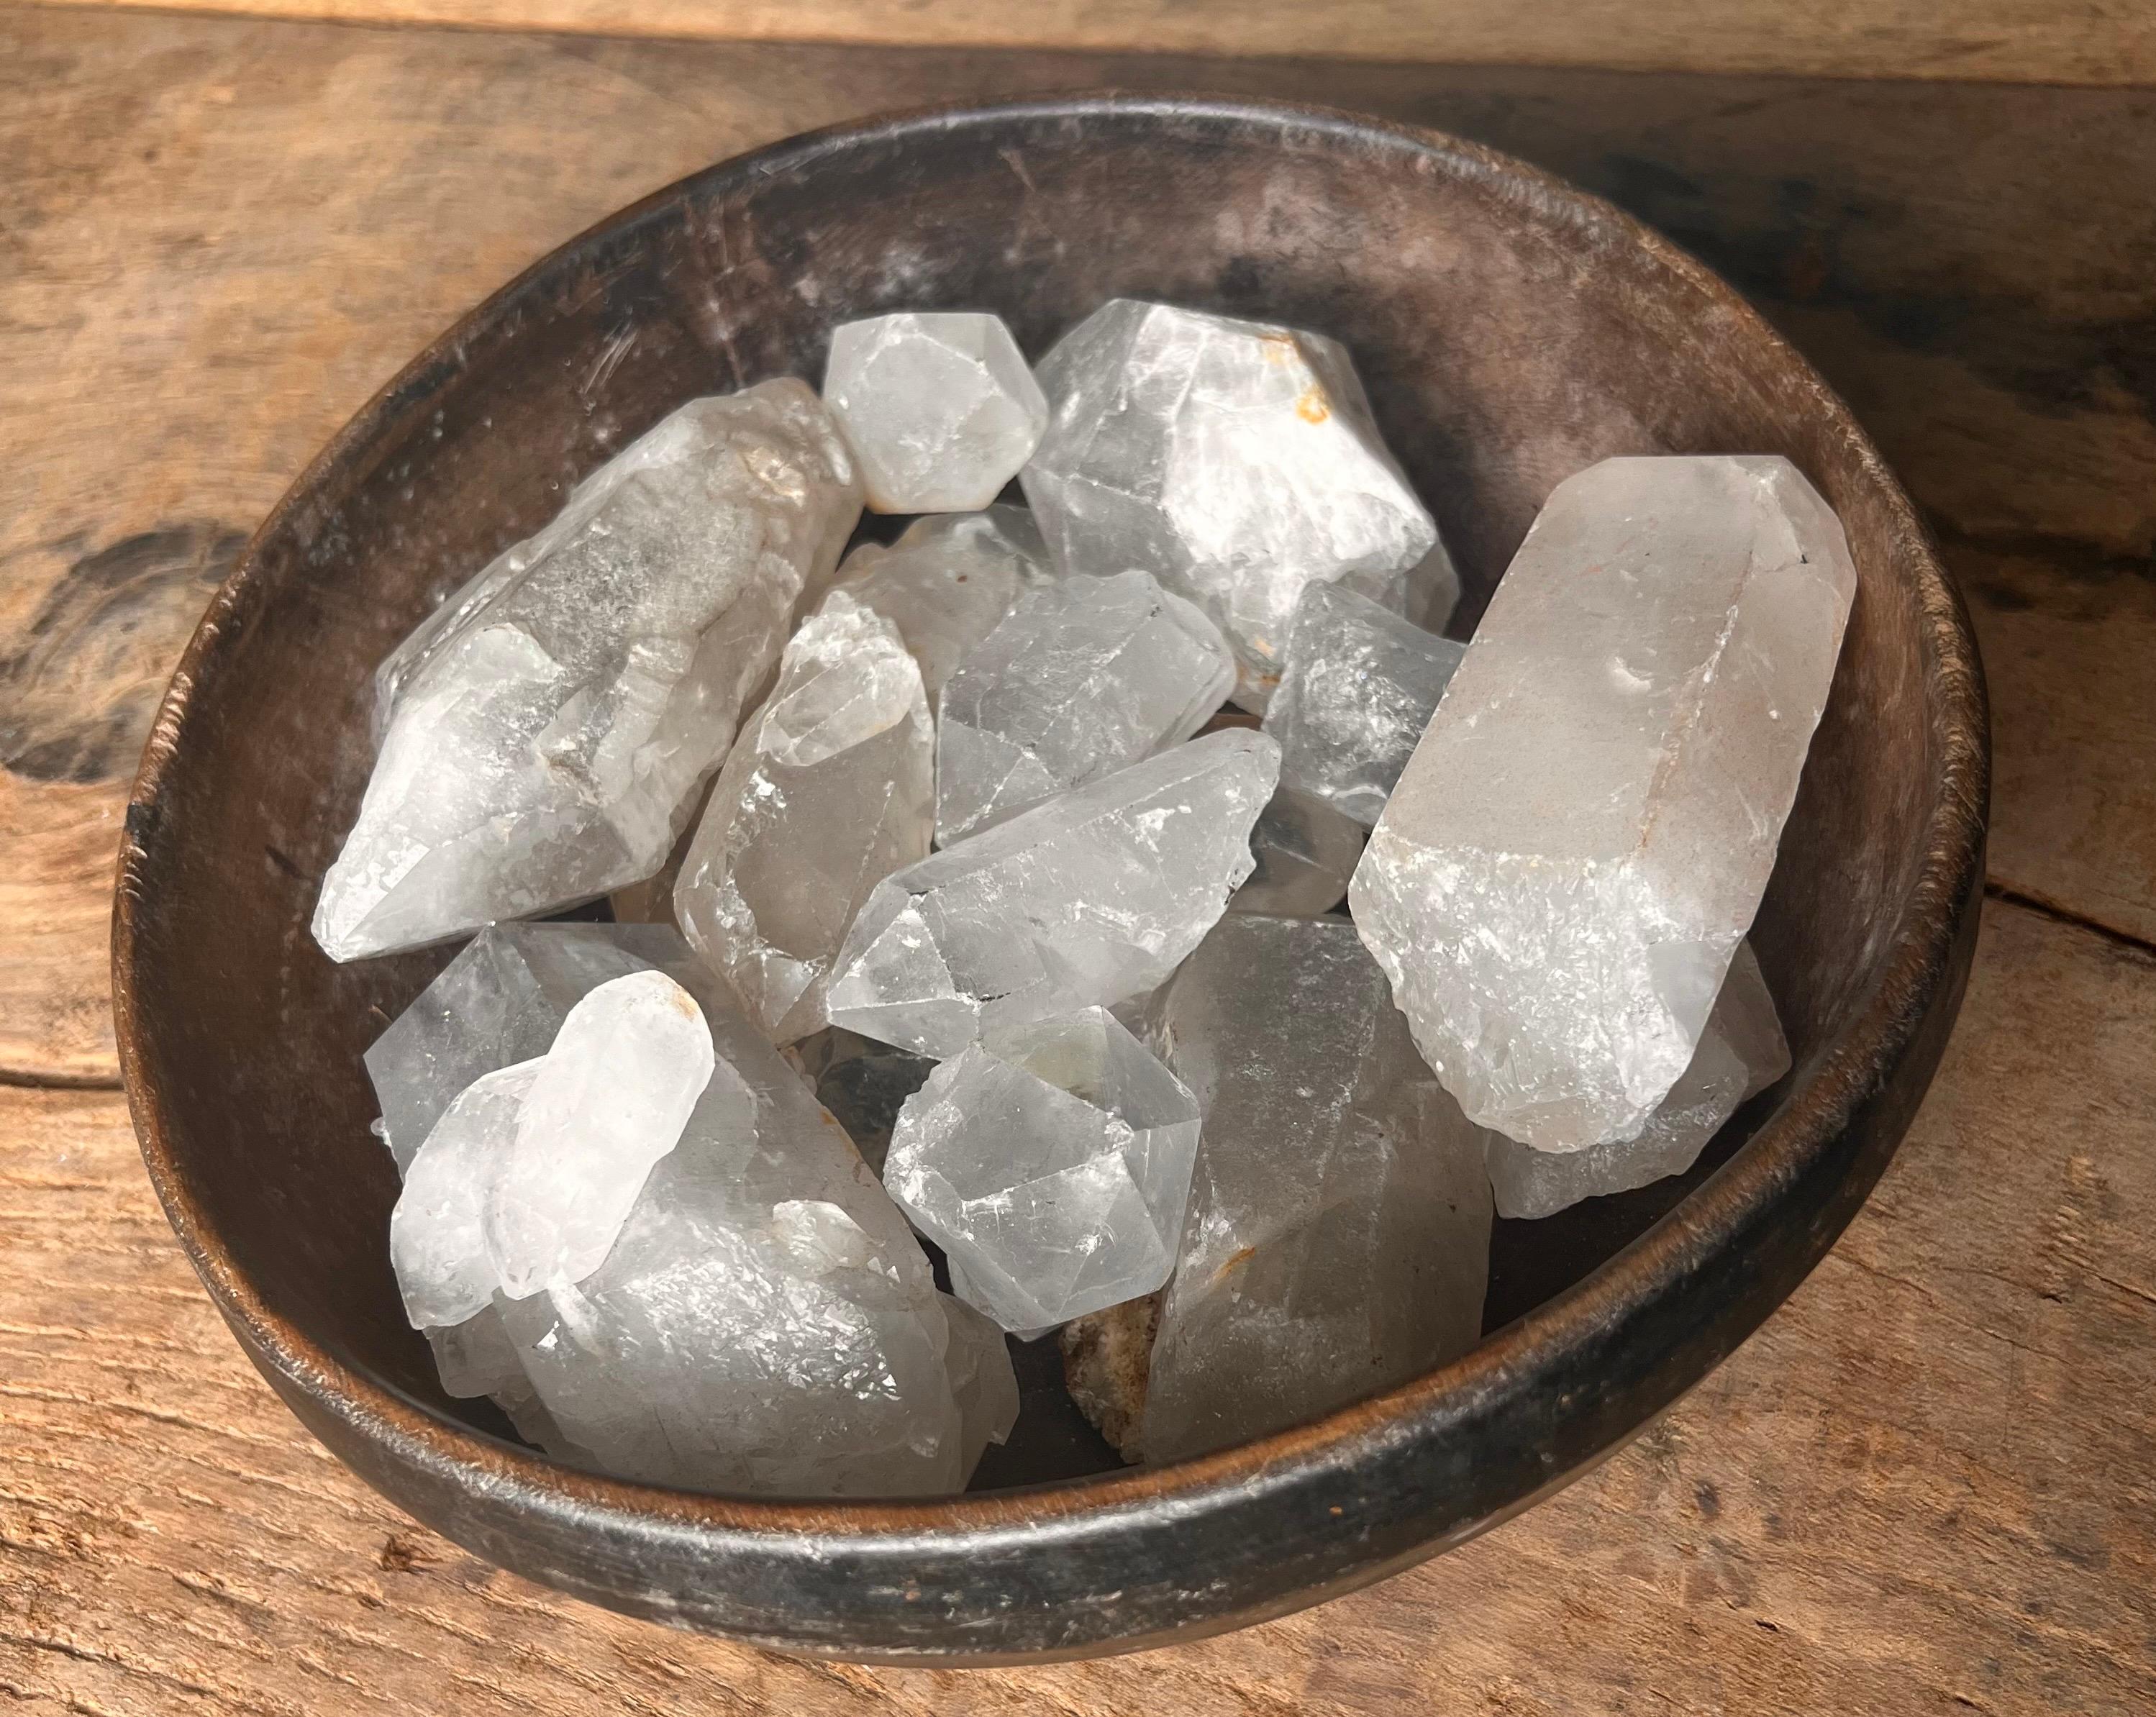 Beautifully patinaed hand-carved wooden bowl, made in the Netherlands.  
Natural crystals in varying shapes and sizes elevate this simple piece. 